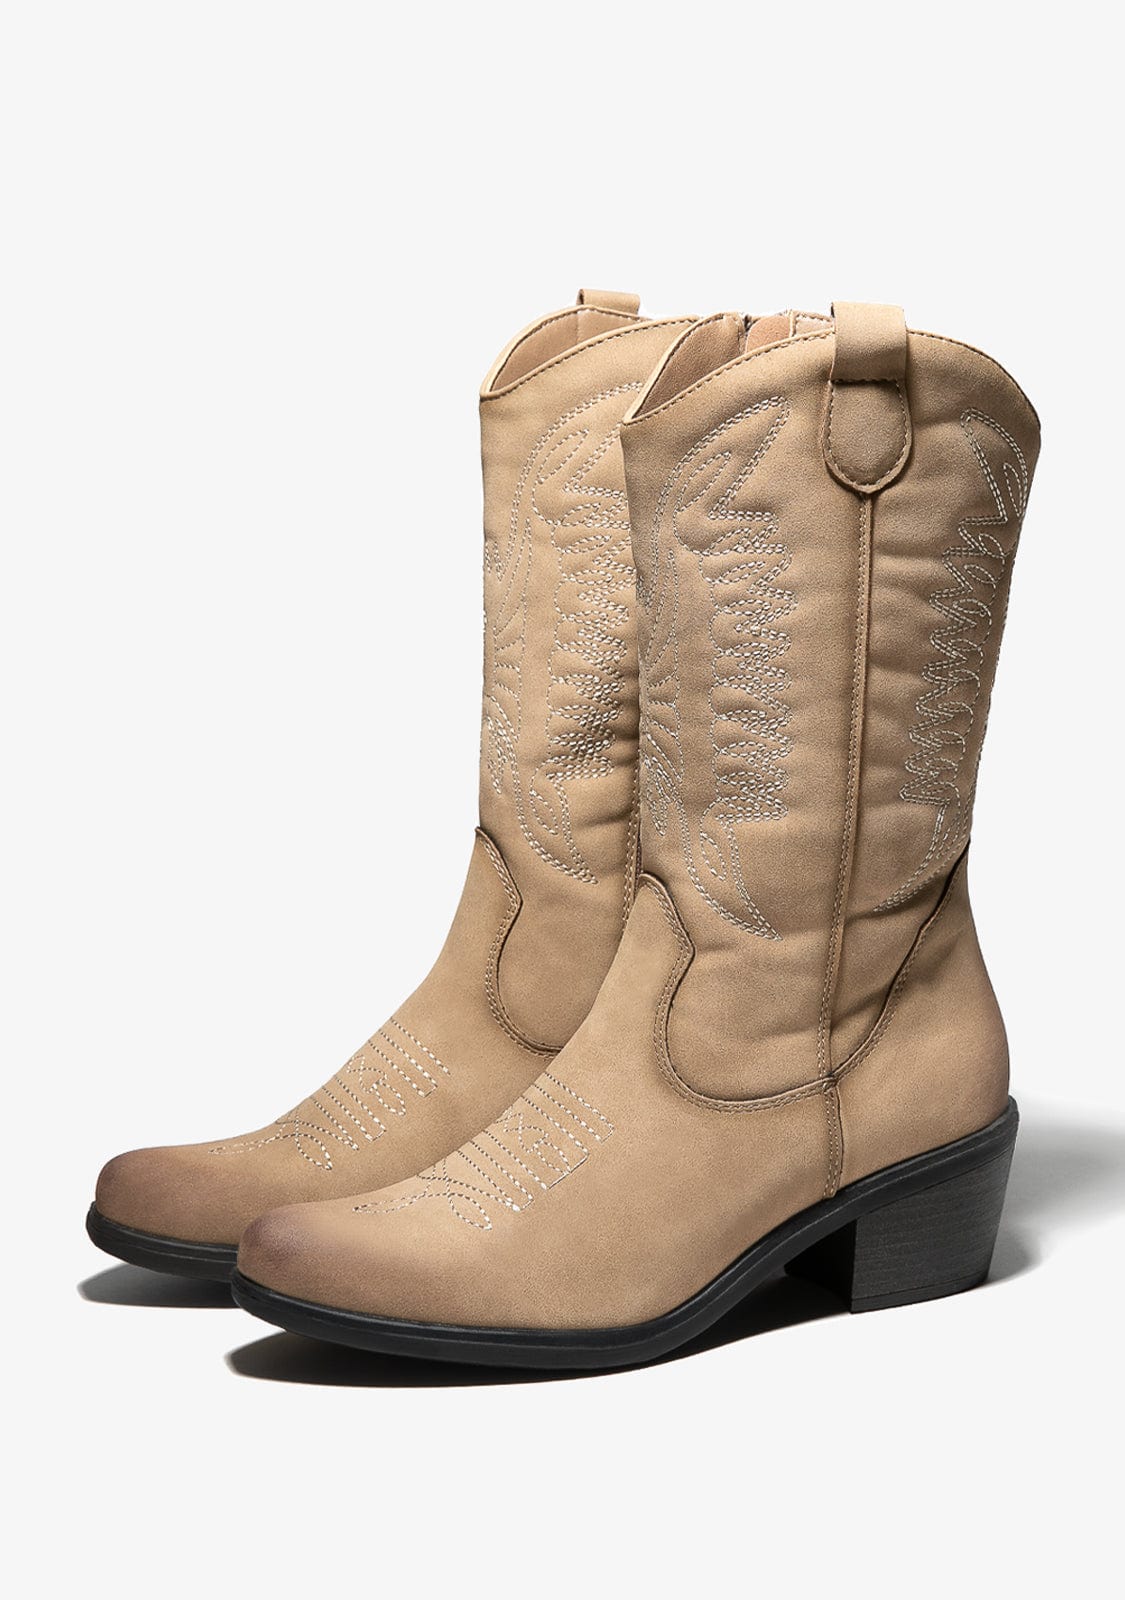 Cowboy Boots for Women, Discover your new boots